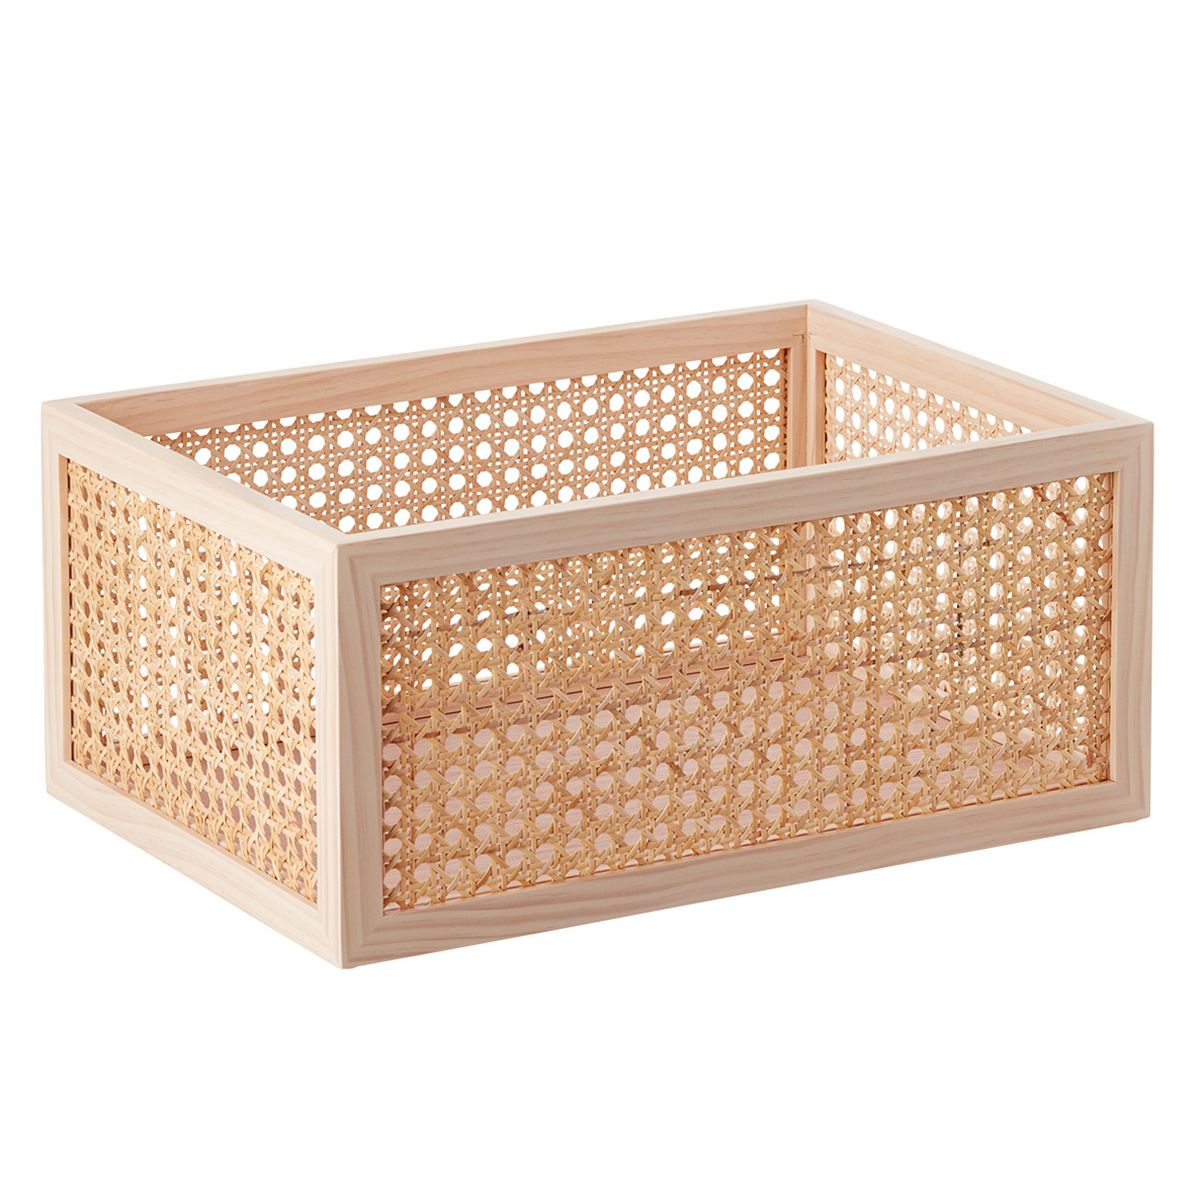 The Container Store Artisan Rattan Cane Bin | The Container Store